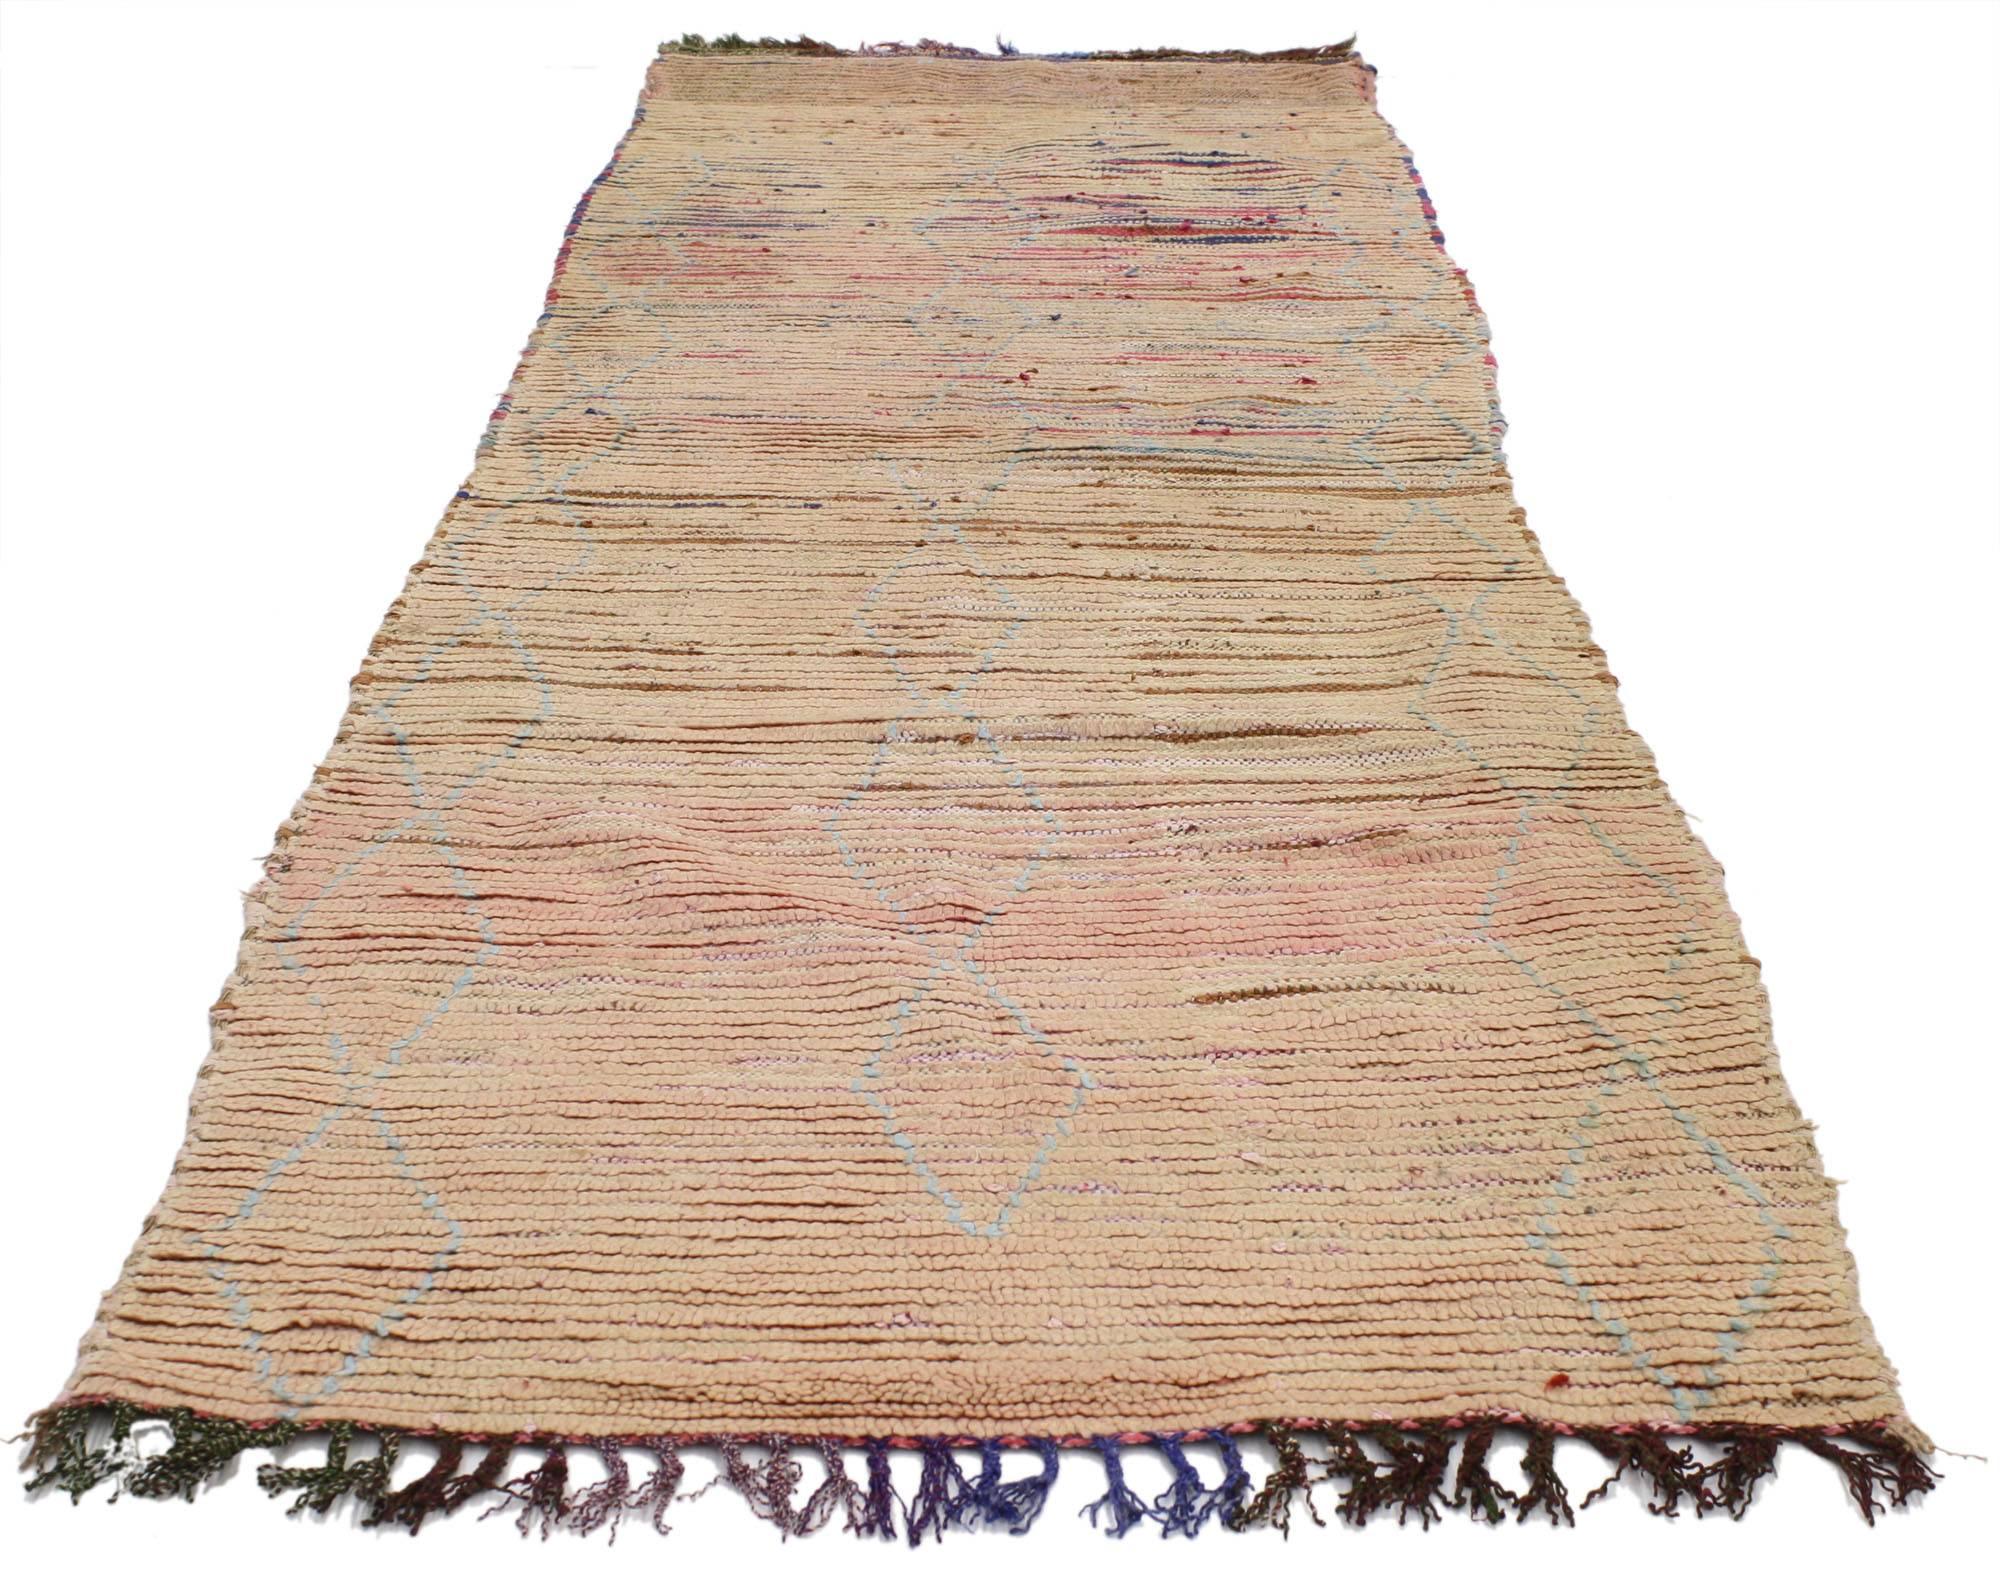 20606 Vintage Berber Moroccan Runner with Soft Pastel Colors and Hygge Style. This hand-knotted wool and cotton vintage Berber Moroccan runner features three subtle sky blue columns of stacked diamond lozenges on a backdrop of pastel striations. The